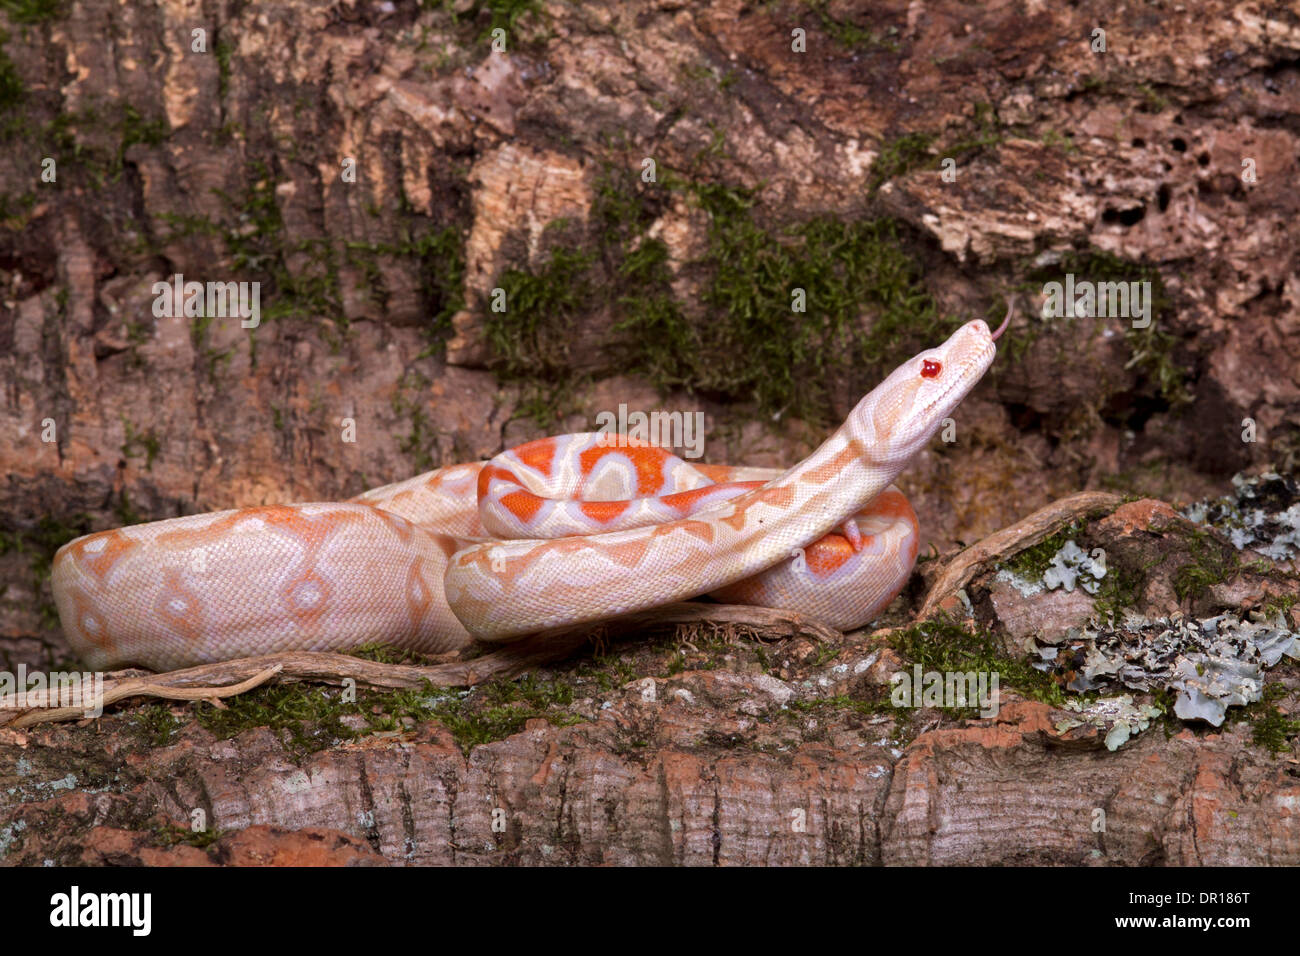 803 Albino Boa Constrictor Images, Stock Photos, 3D objects, & Vectors